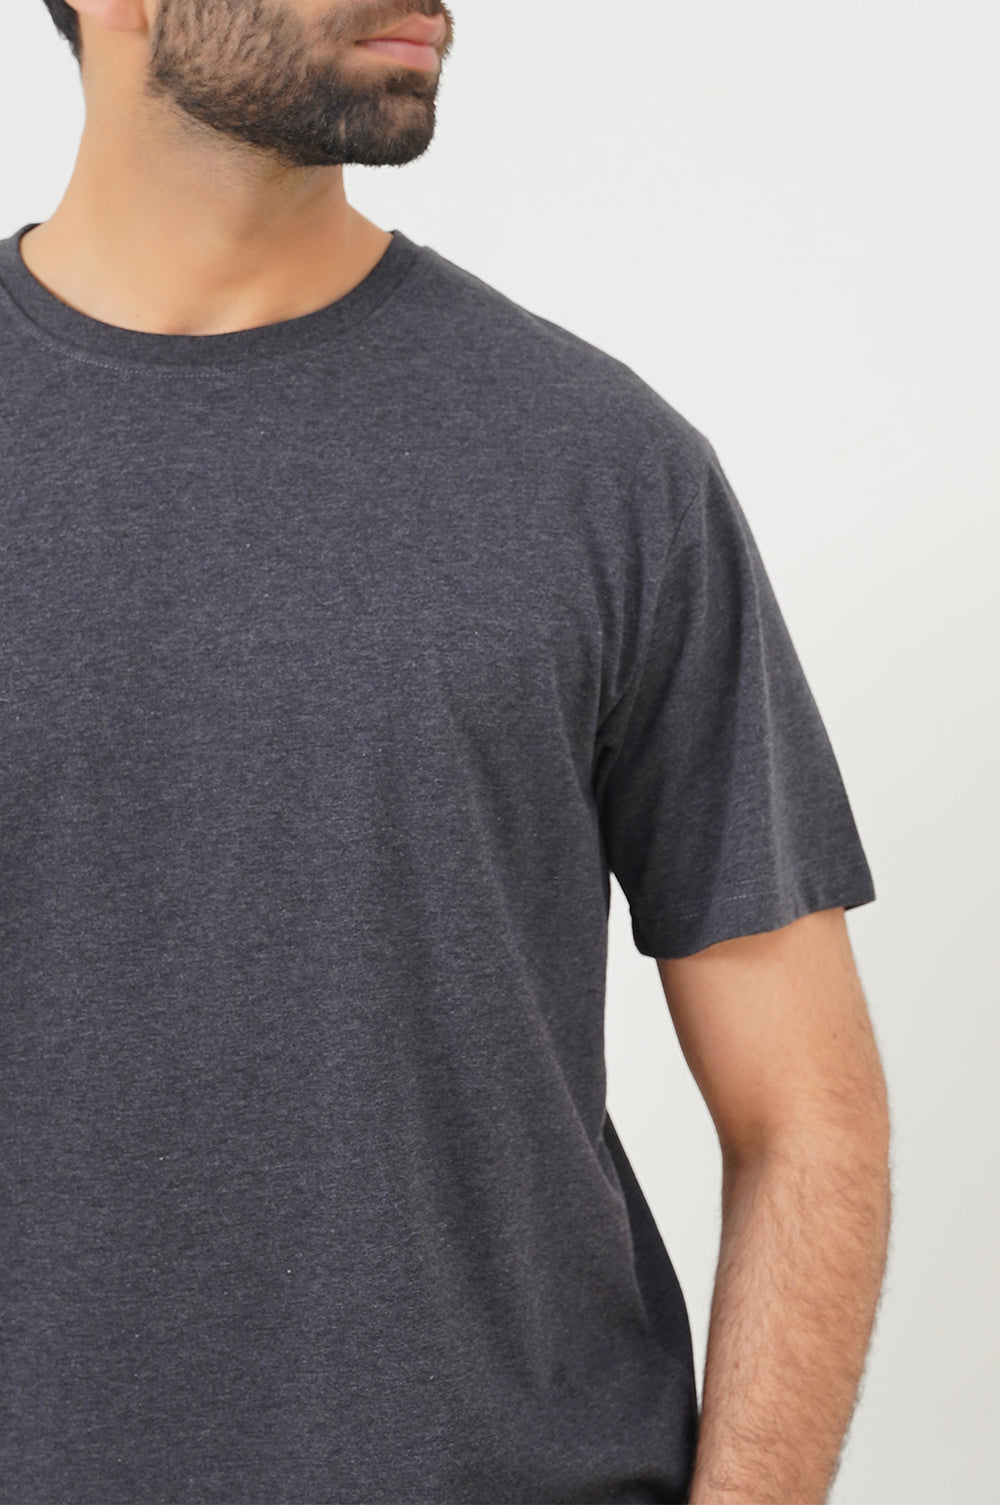 HEATHER CHARCOAL ROUND NECK T-SHIRT